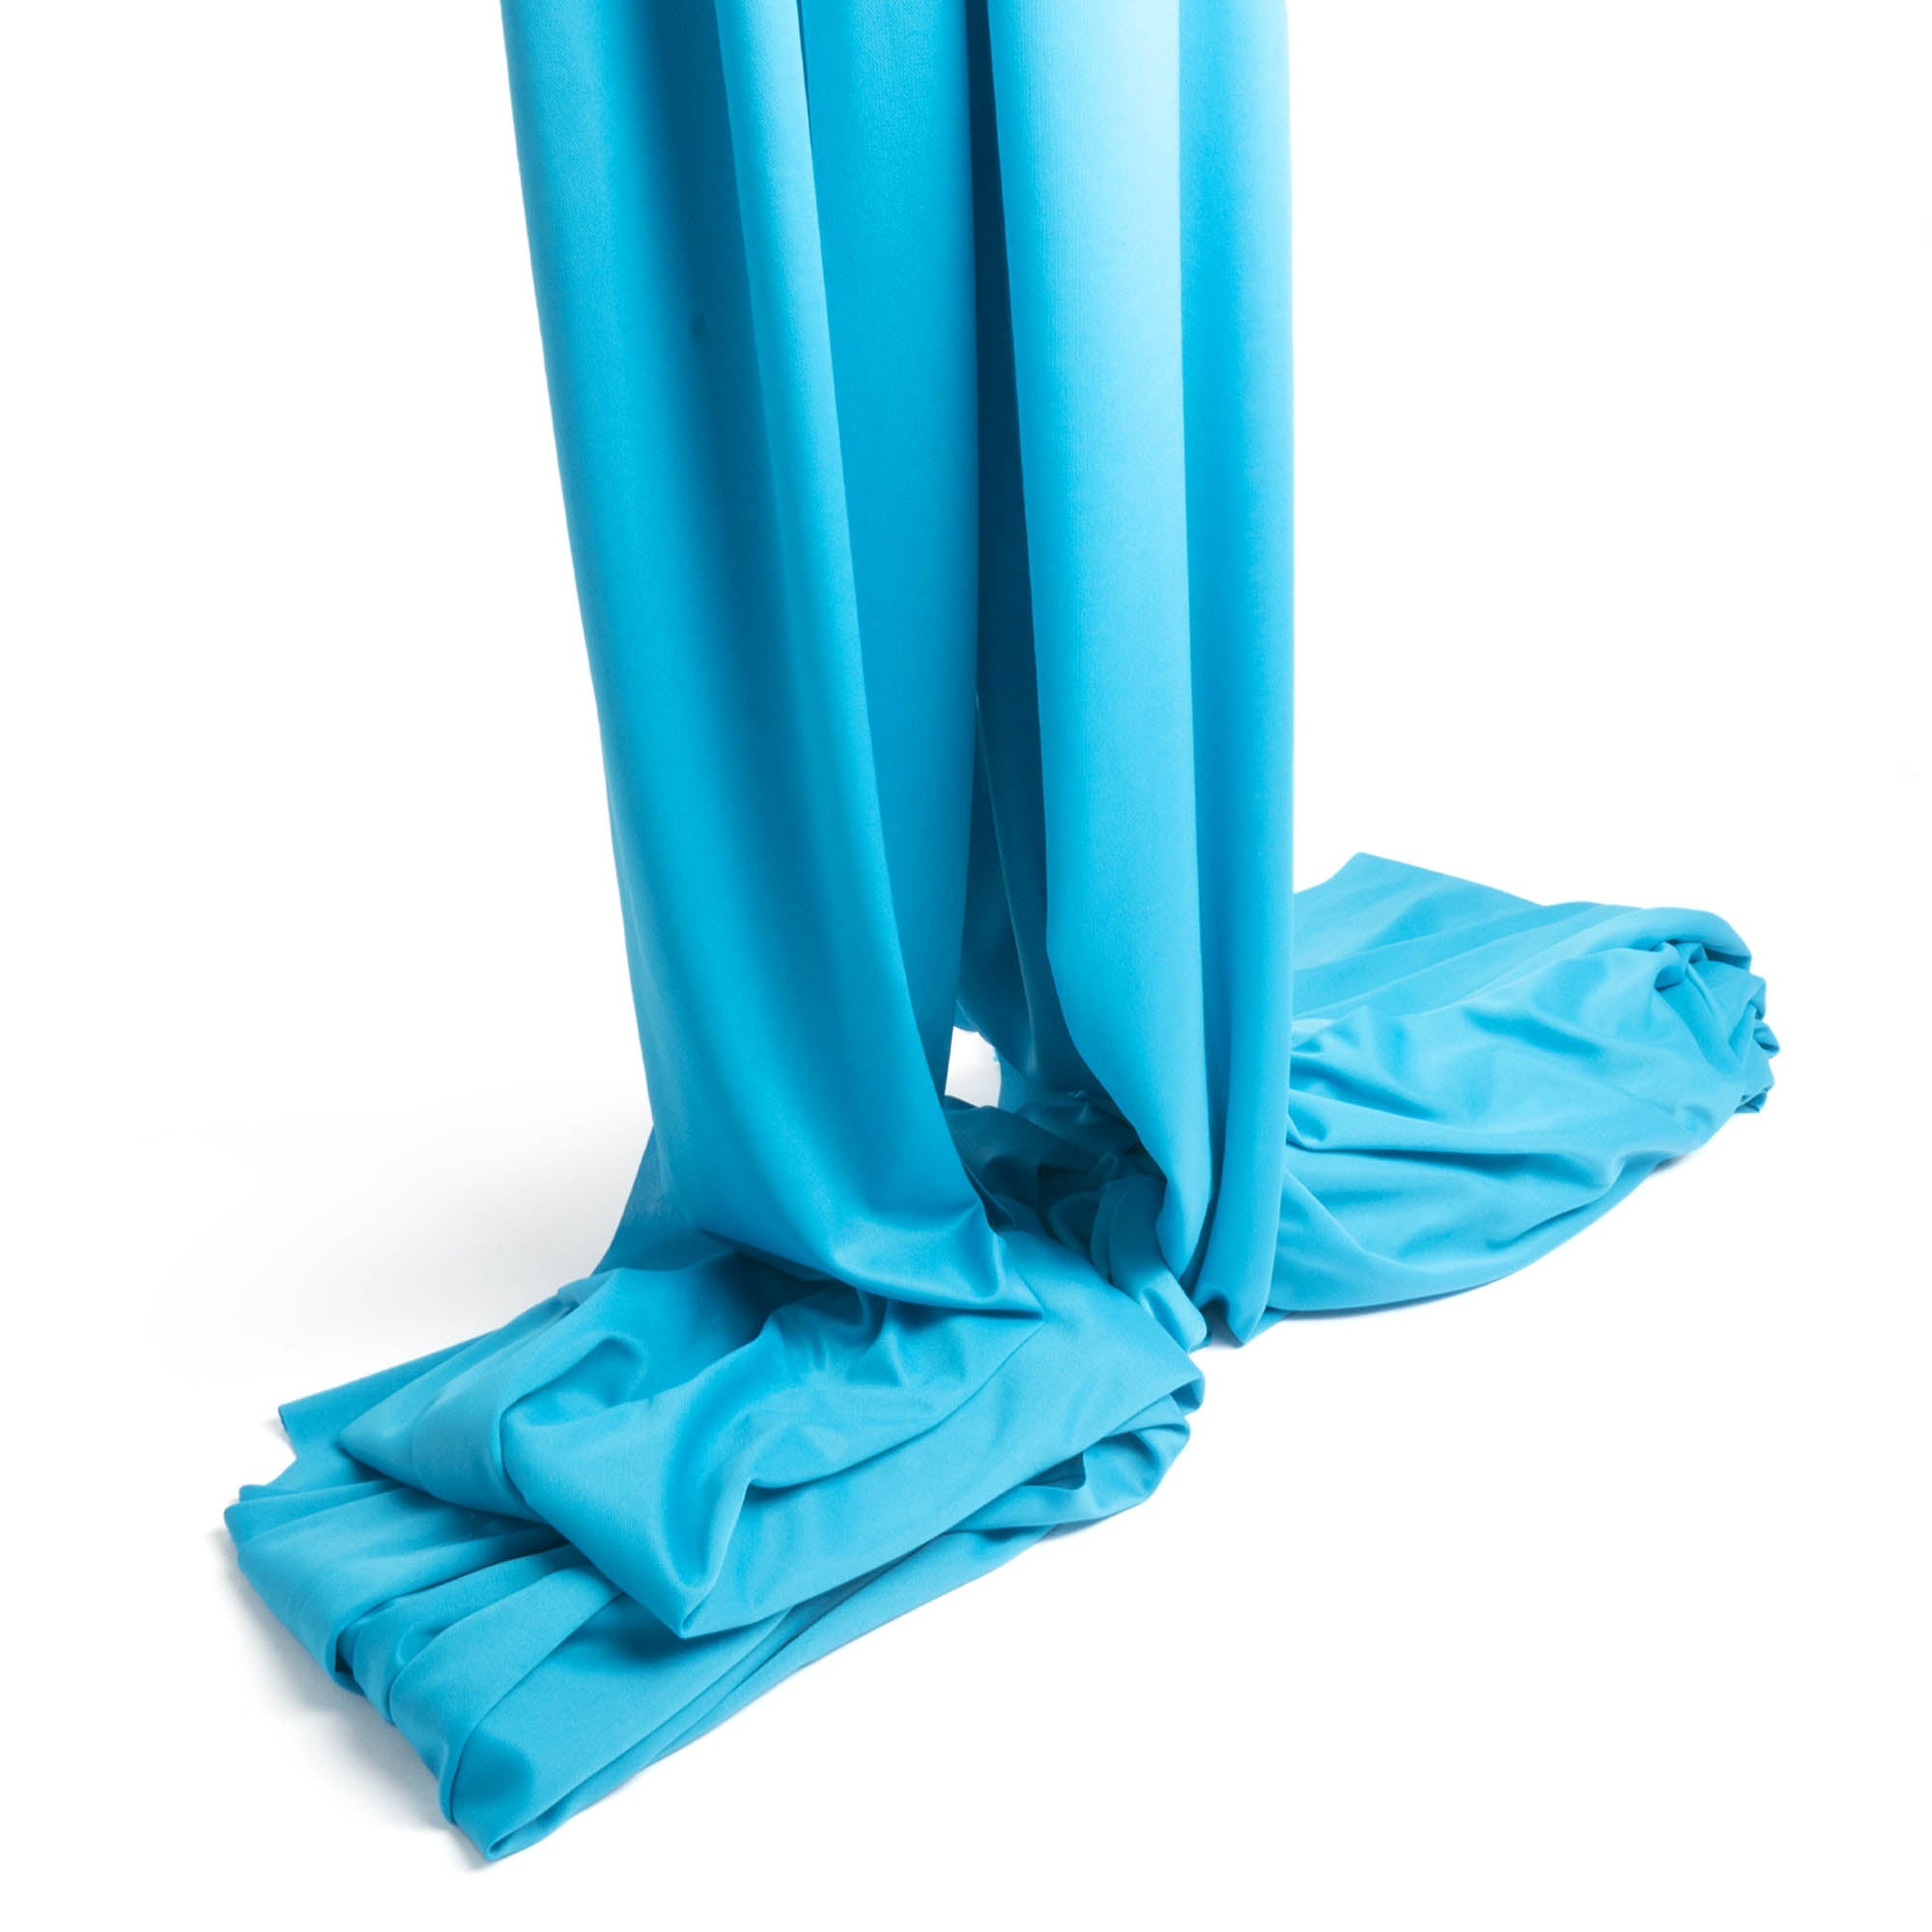 Firetoys youth aerial silk true turquoise folded ends